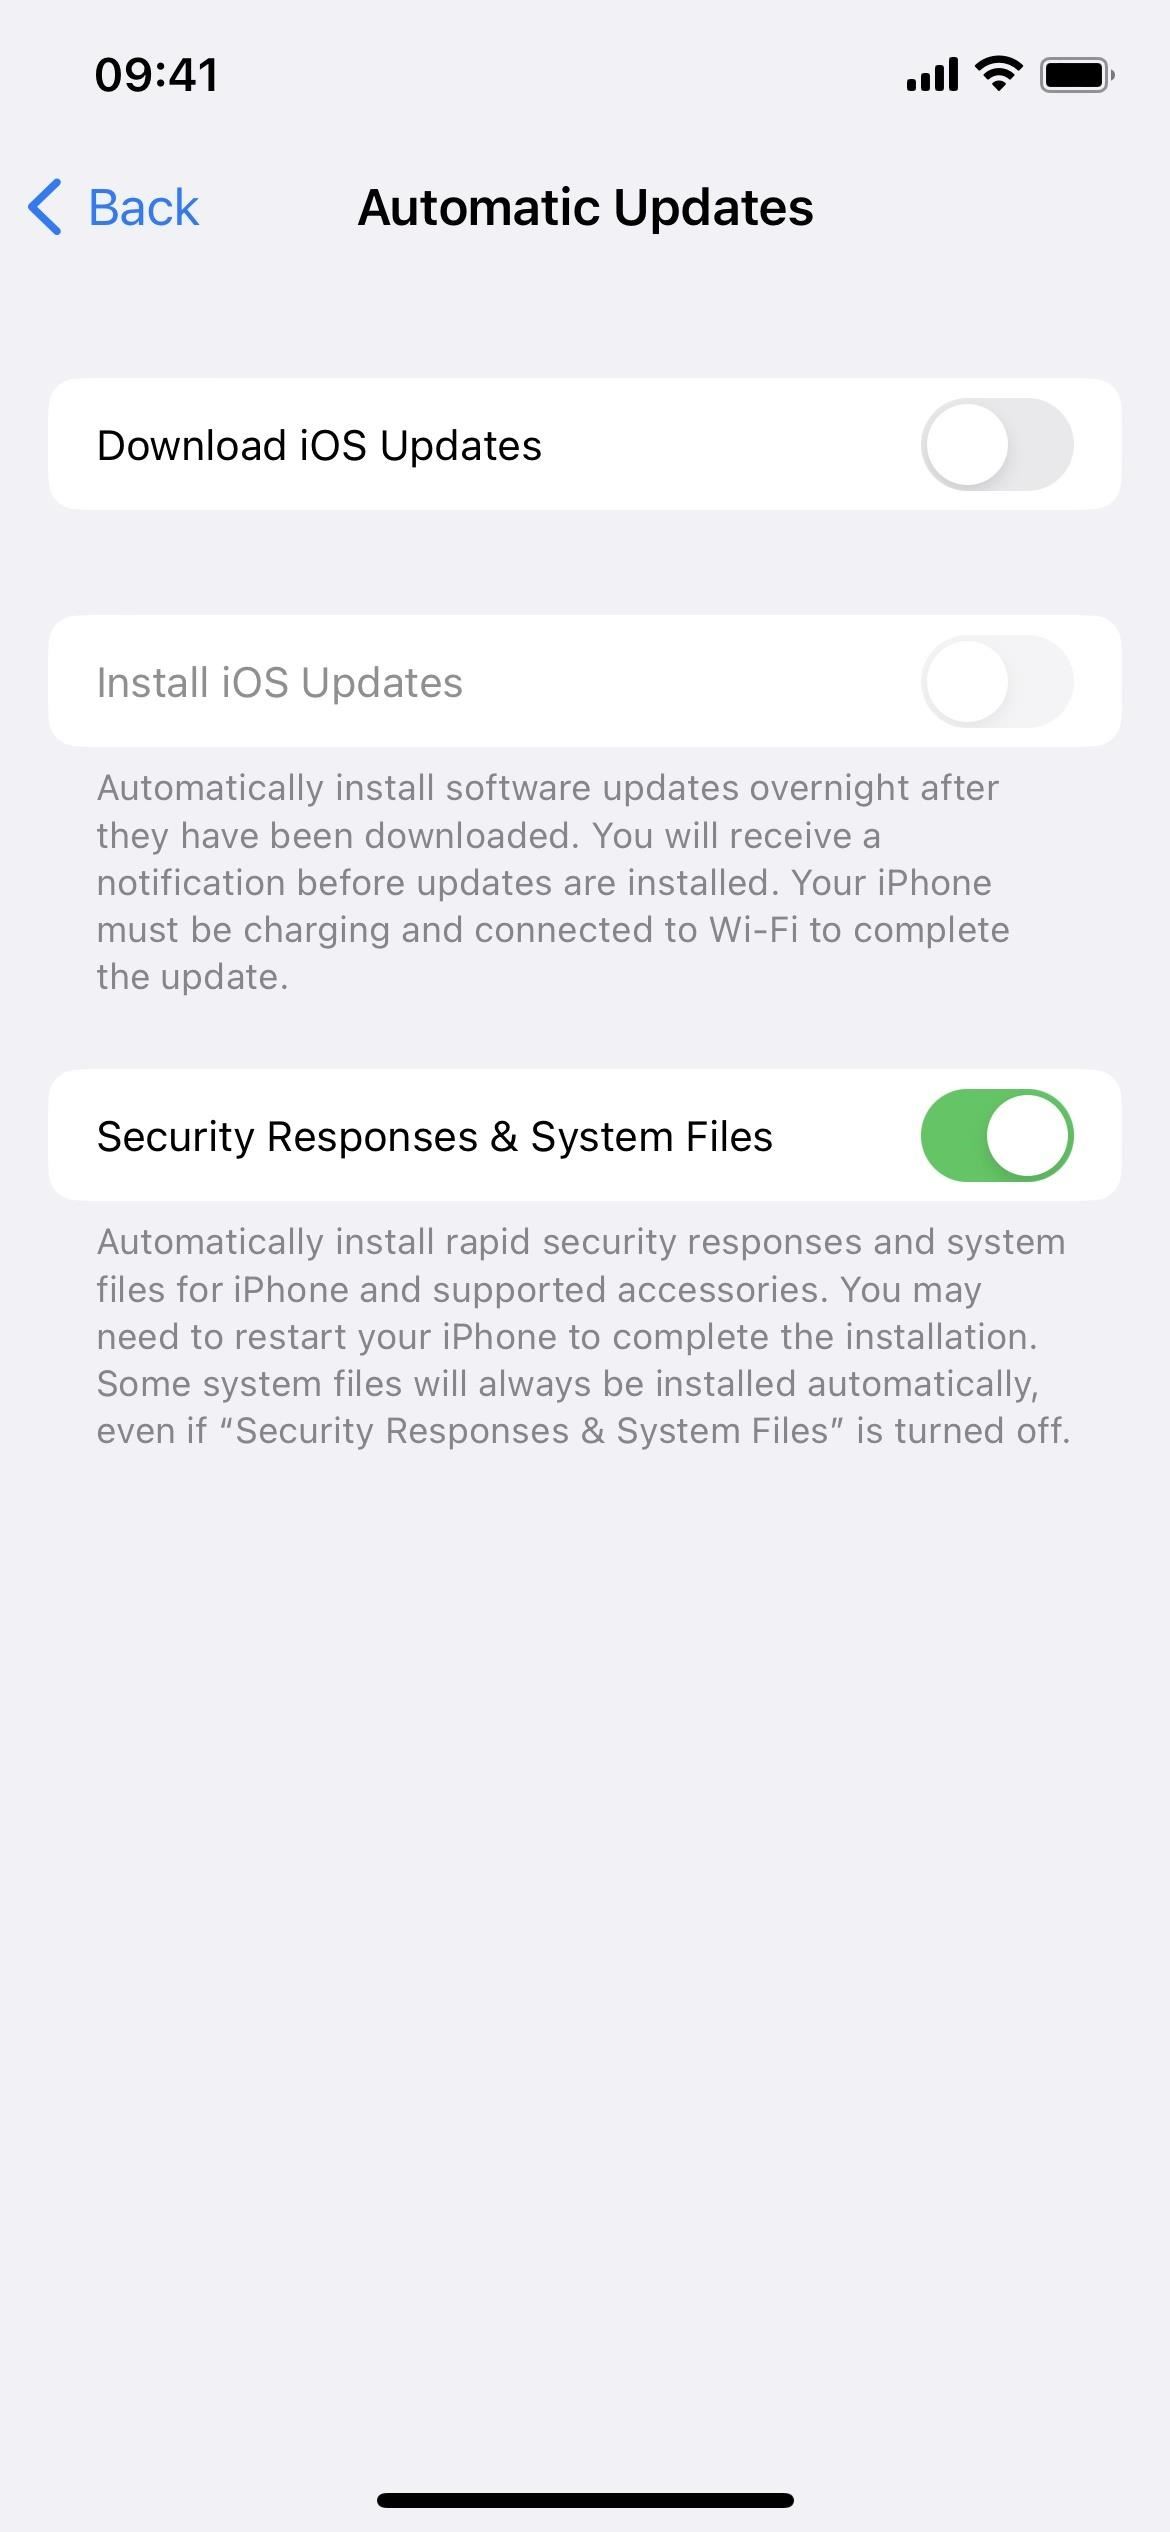 How to Uninstall Specific Software Updates on Your iPhone When You Experience Performance Issues